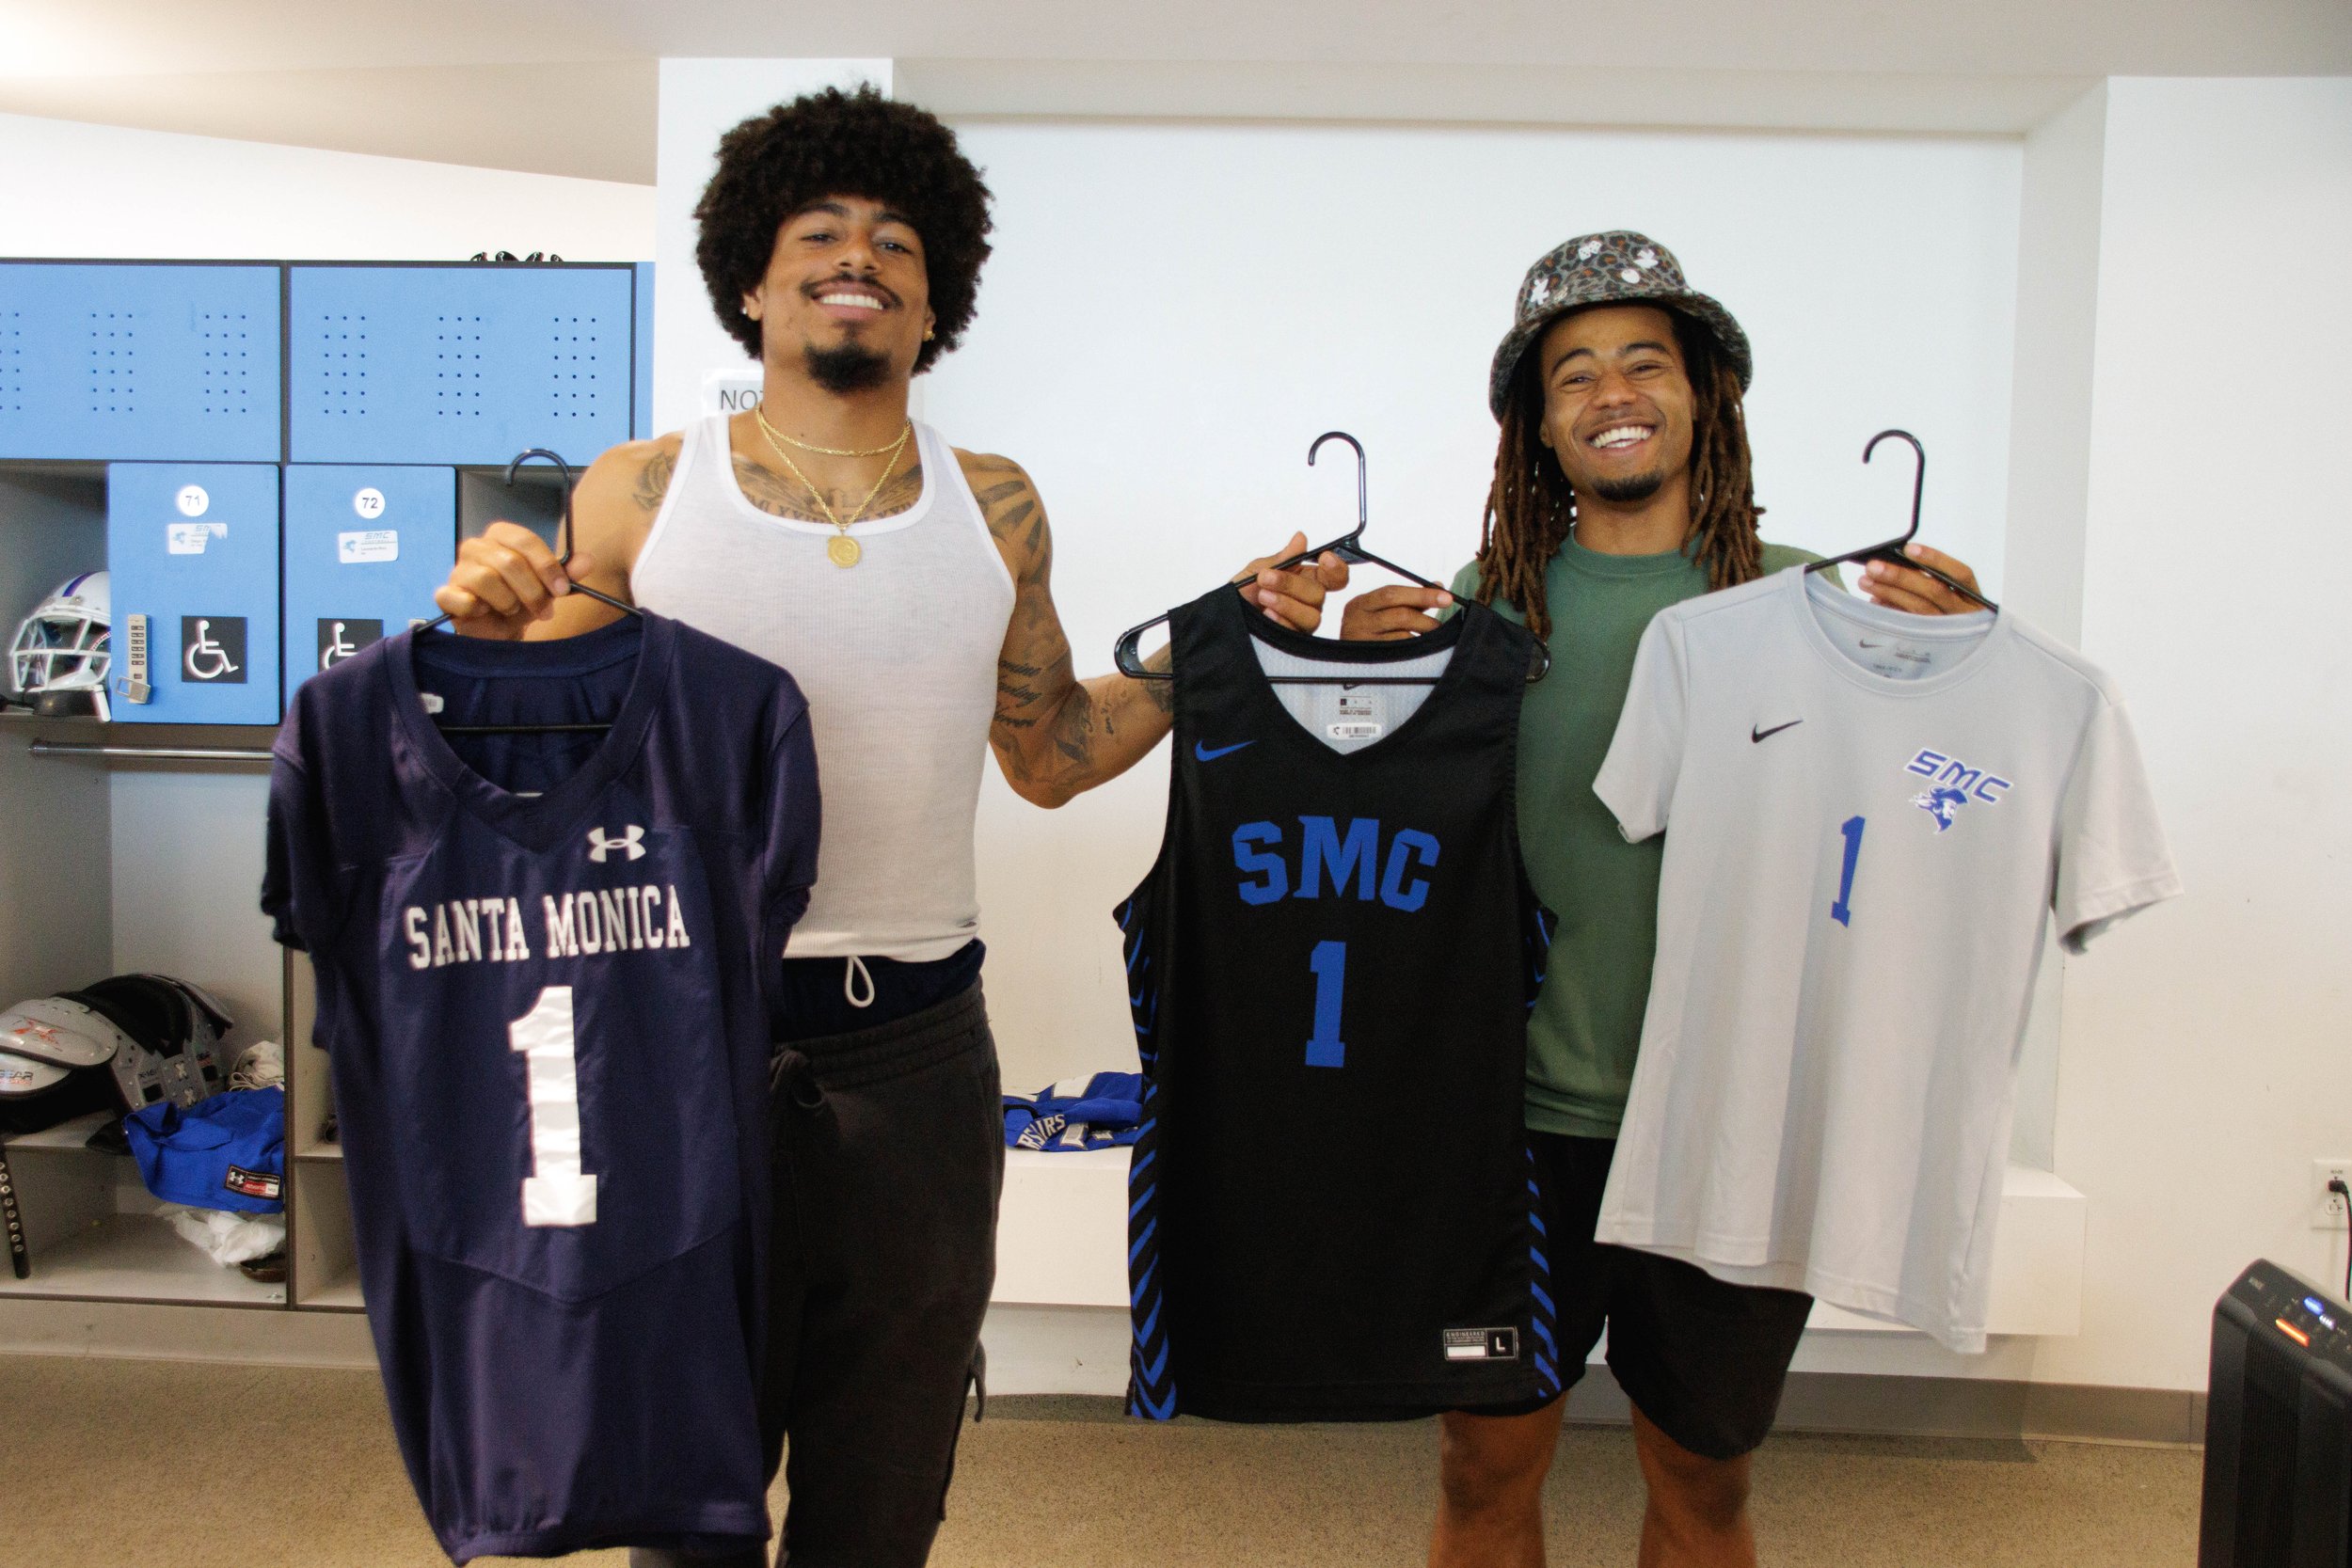  Santa Monica College (SMC) Football players number 1 Maurice Herrera, left, and number 2 Melvin Hicks, right, holding the new jerseys in the men's locker room in the SMC Core Perfomance Center, Santa Monica, Calif. Sept. 07, 2023. (Danniel Sumarkho 